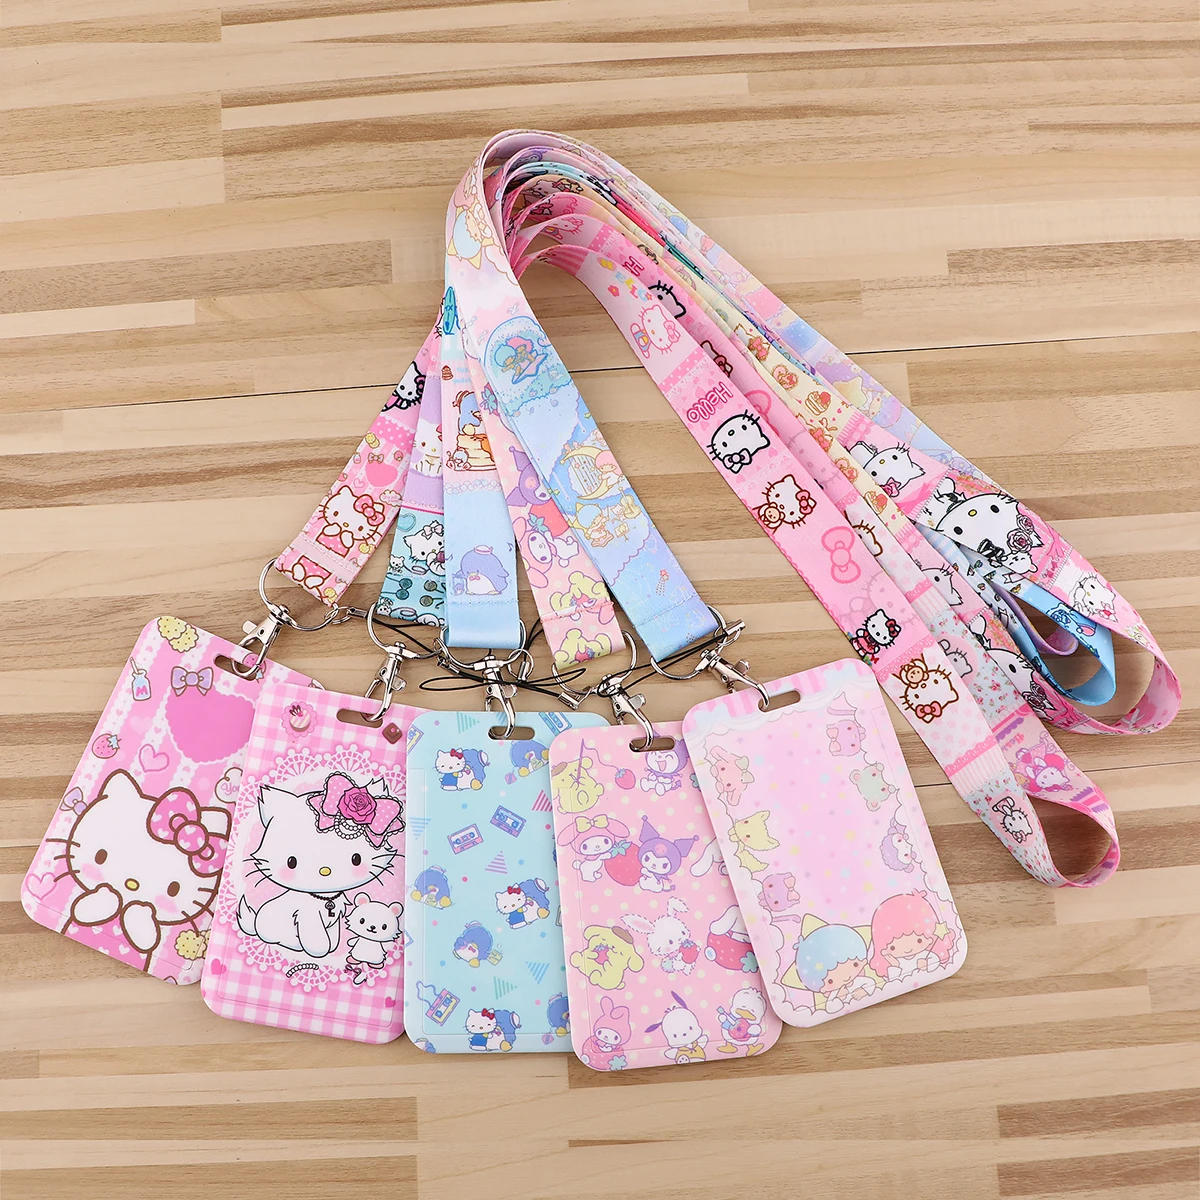 the golden girls keychain lanyards id badge holder id card pass gym mobile phone badge holder key strap webbings ribbons Rabbit Keychain Kawaii Cat Cartoon Anime Lanyards for Key ID Card Gym Cell Phone Strap USB Badge Holder Accessories Gift